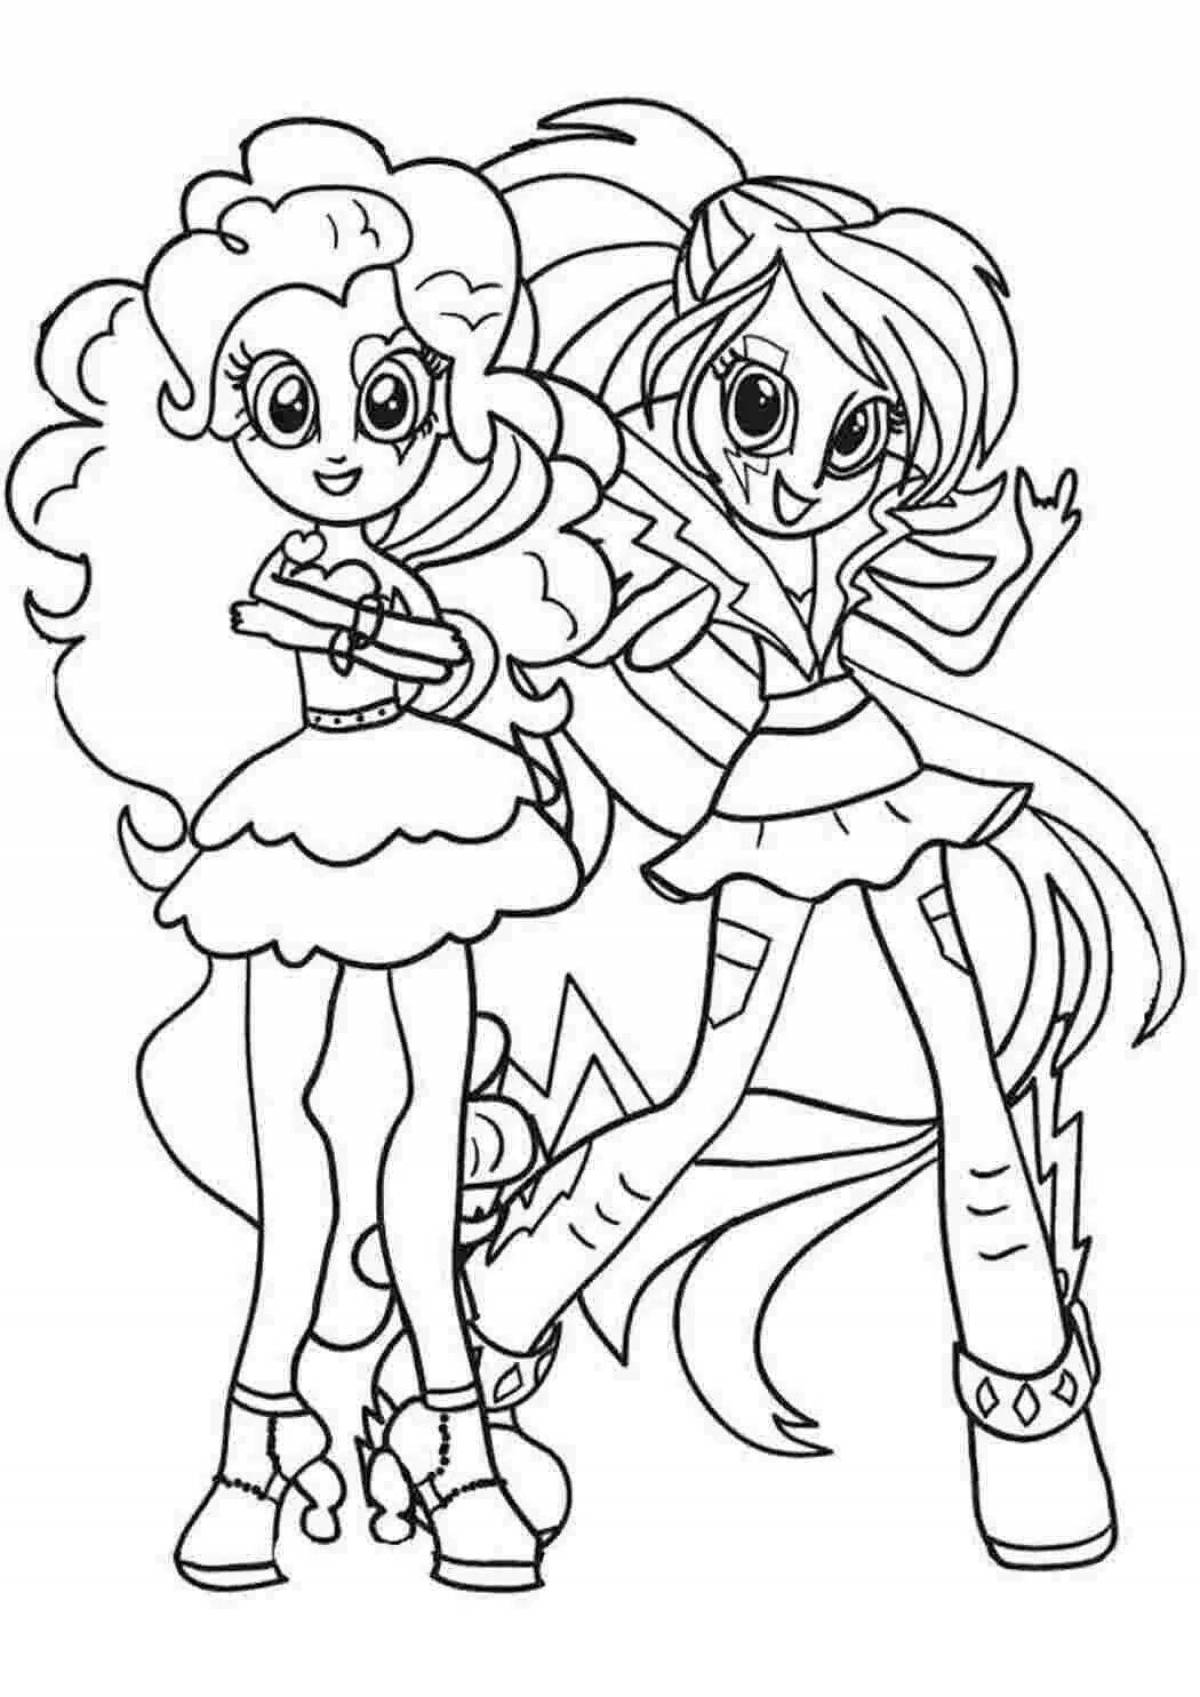 Colorful pinkie pie coloring page